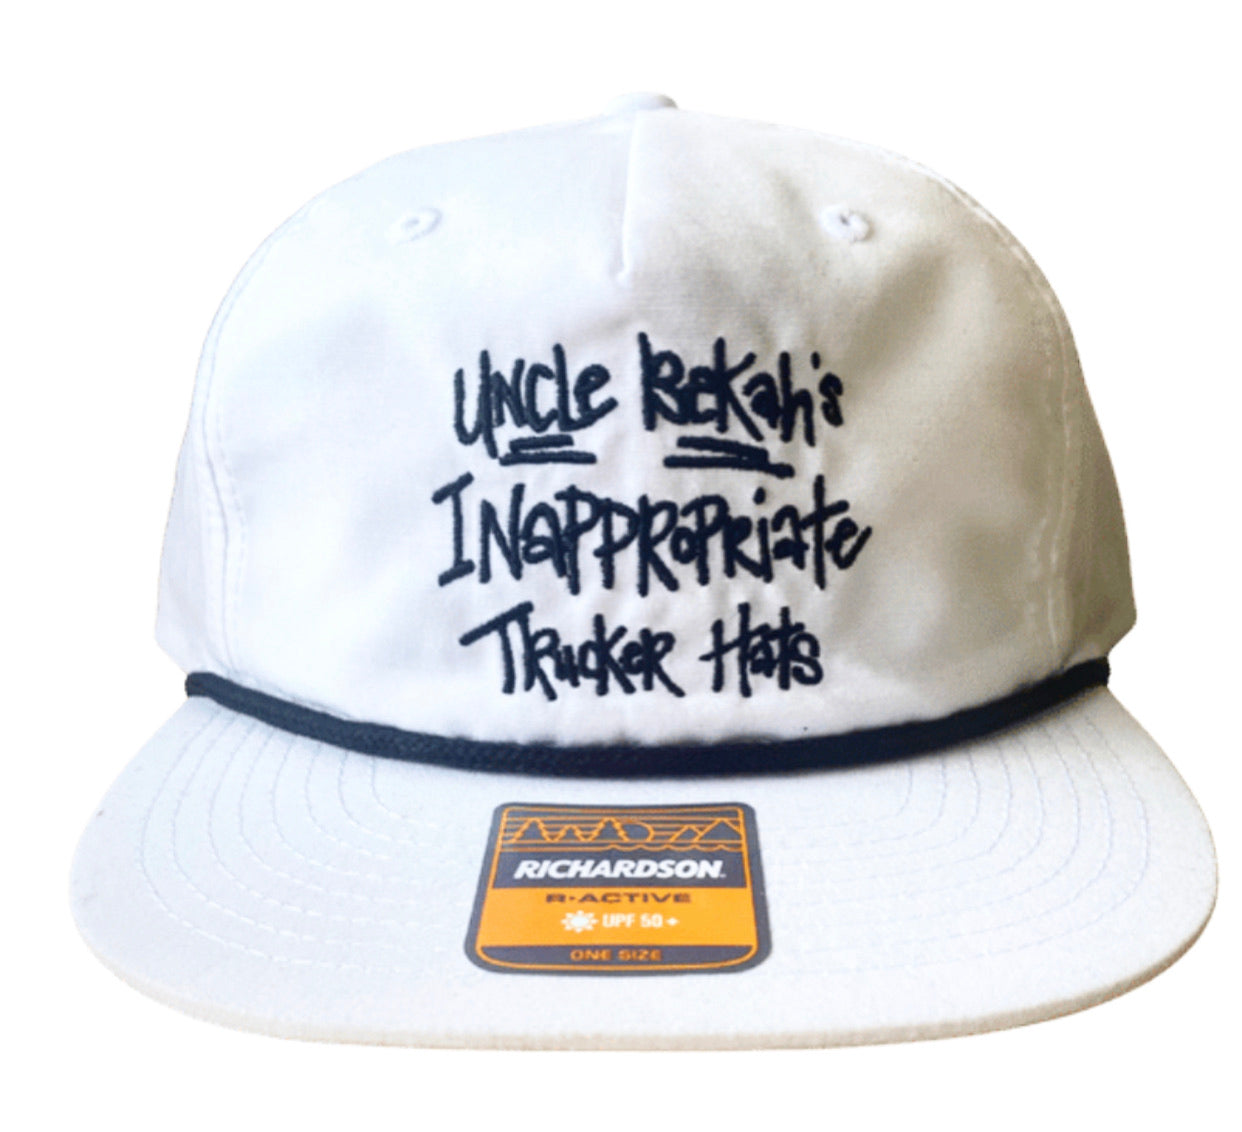 Embroidered Inapppropriate Trucker Hats Logo